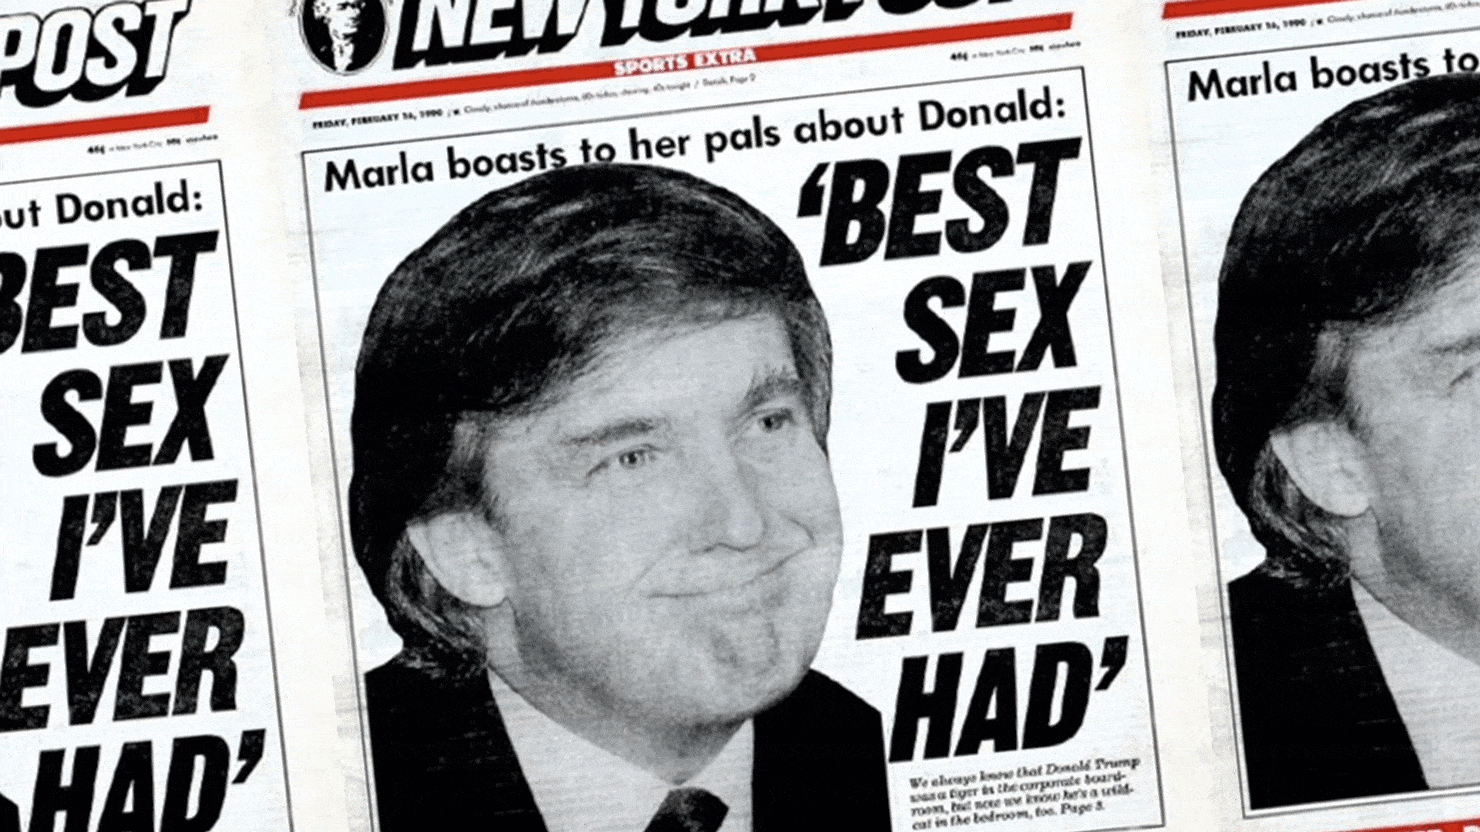 The Story Behind Trumps Infamous Best Sex I Ever Had Headline pic